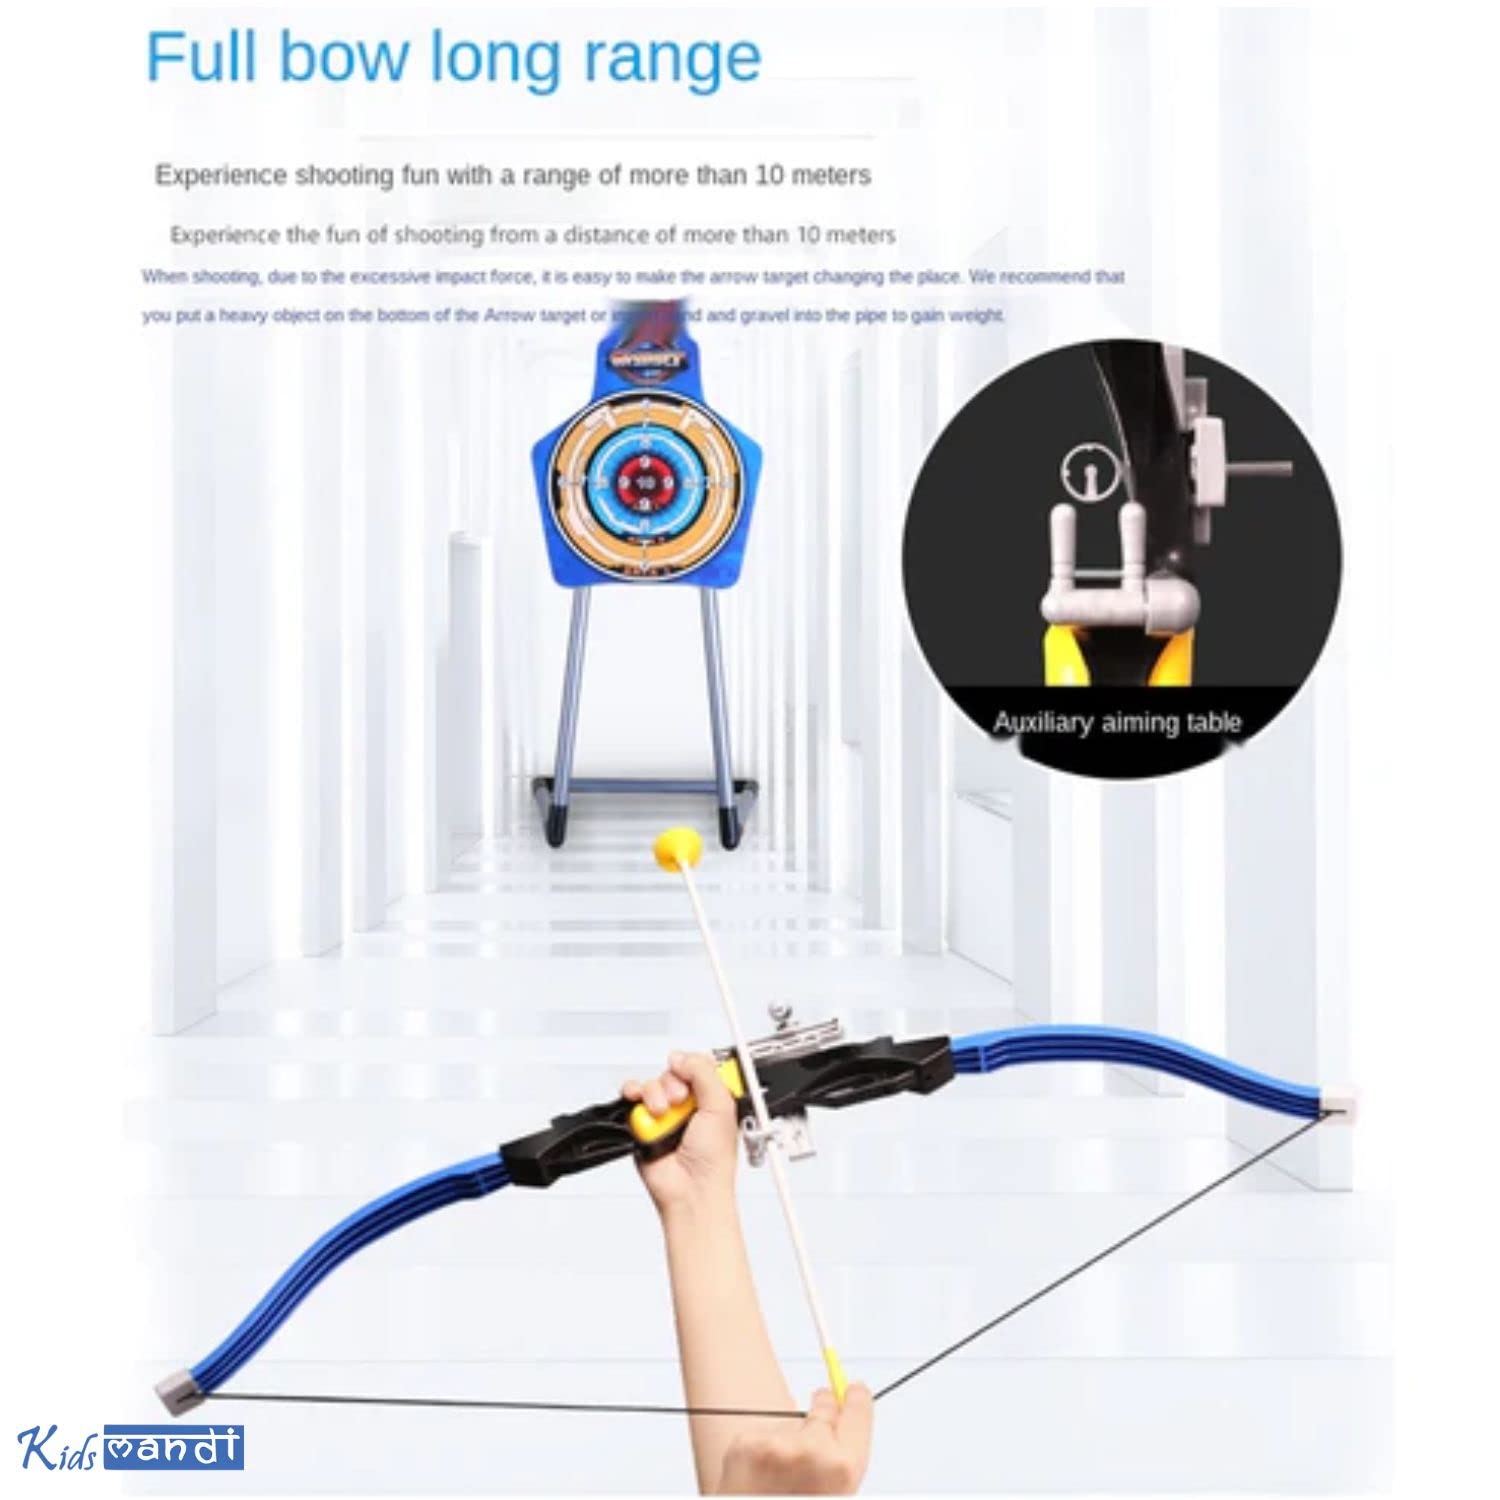 Kids Mandi archery bow and arrow toy set with target board.